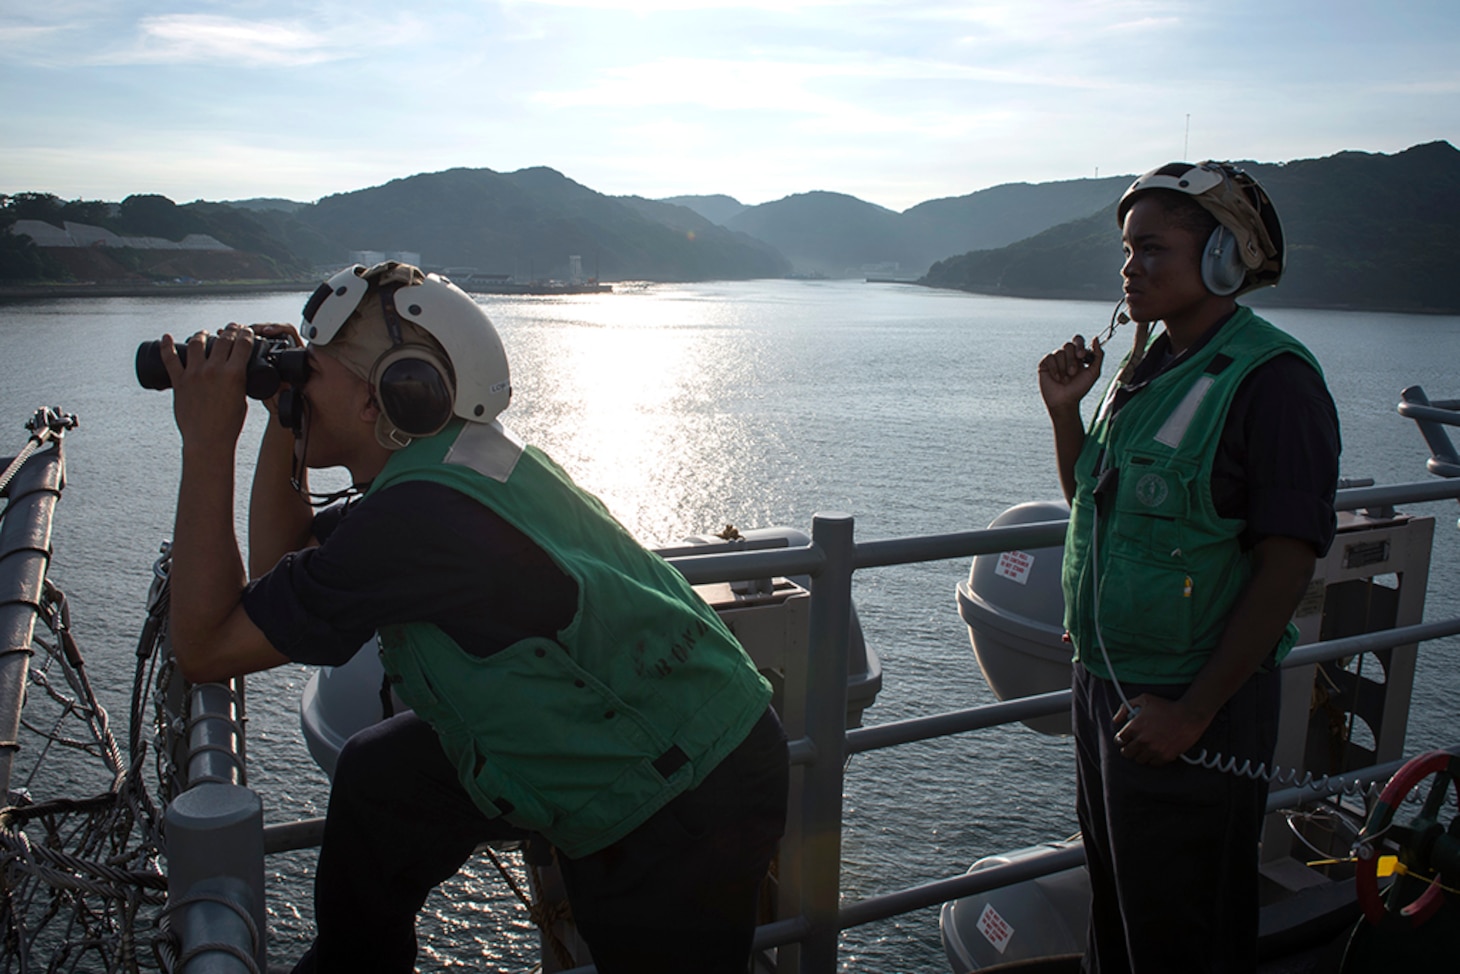 Logistics Specialist Seaman Recruit Argenis Pena, left, and Logistics Specialist 3rd Class Saskia France, right, both assigned to amphibious assault ship USS Bonhomme Richard (LHD 6), stand phone talker watch as the ship departs Sasebo, Japan, Aug, 6, 2016, for its fall patrol. Bonhomme Richard is the flagship of the Bonhomme Richard Expeditionary Strike Group and is forward-deployed in the U.S. 7th Fleet area of operation. 


